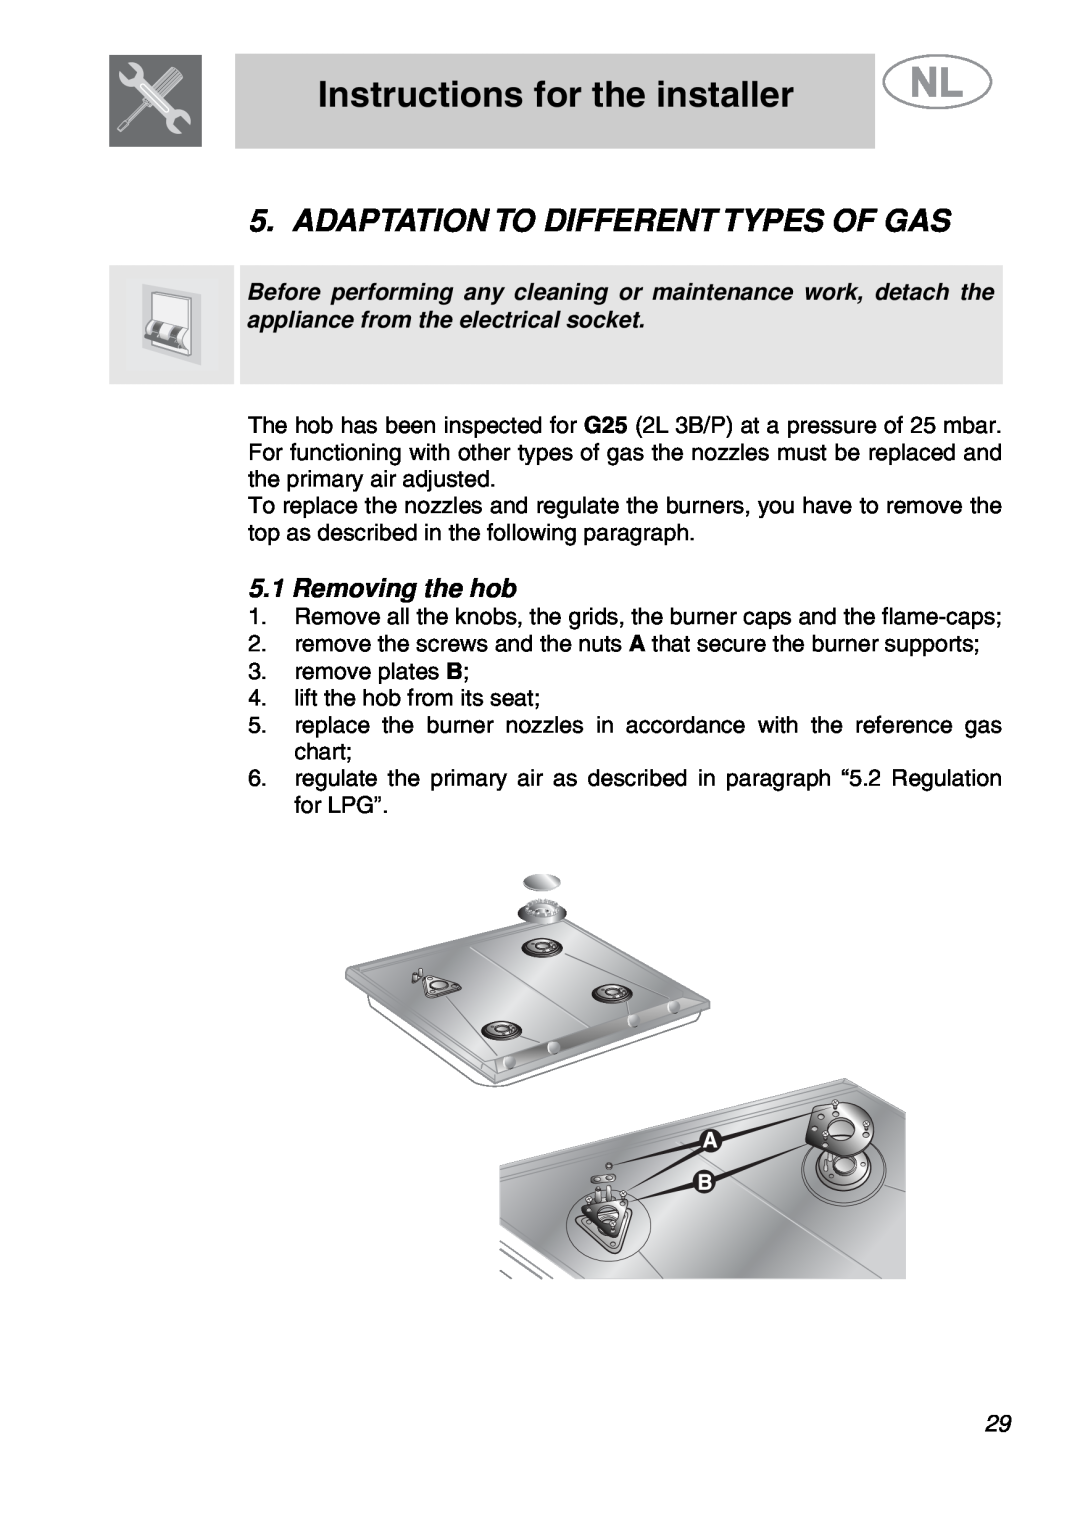 Smeg GKCO64-3, GKDCO15 manual Adaptation To Different Types Of Gas, Instructions for the installer, Removing the hob 